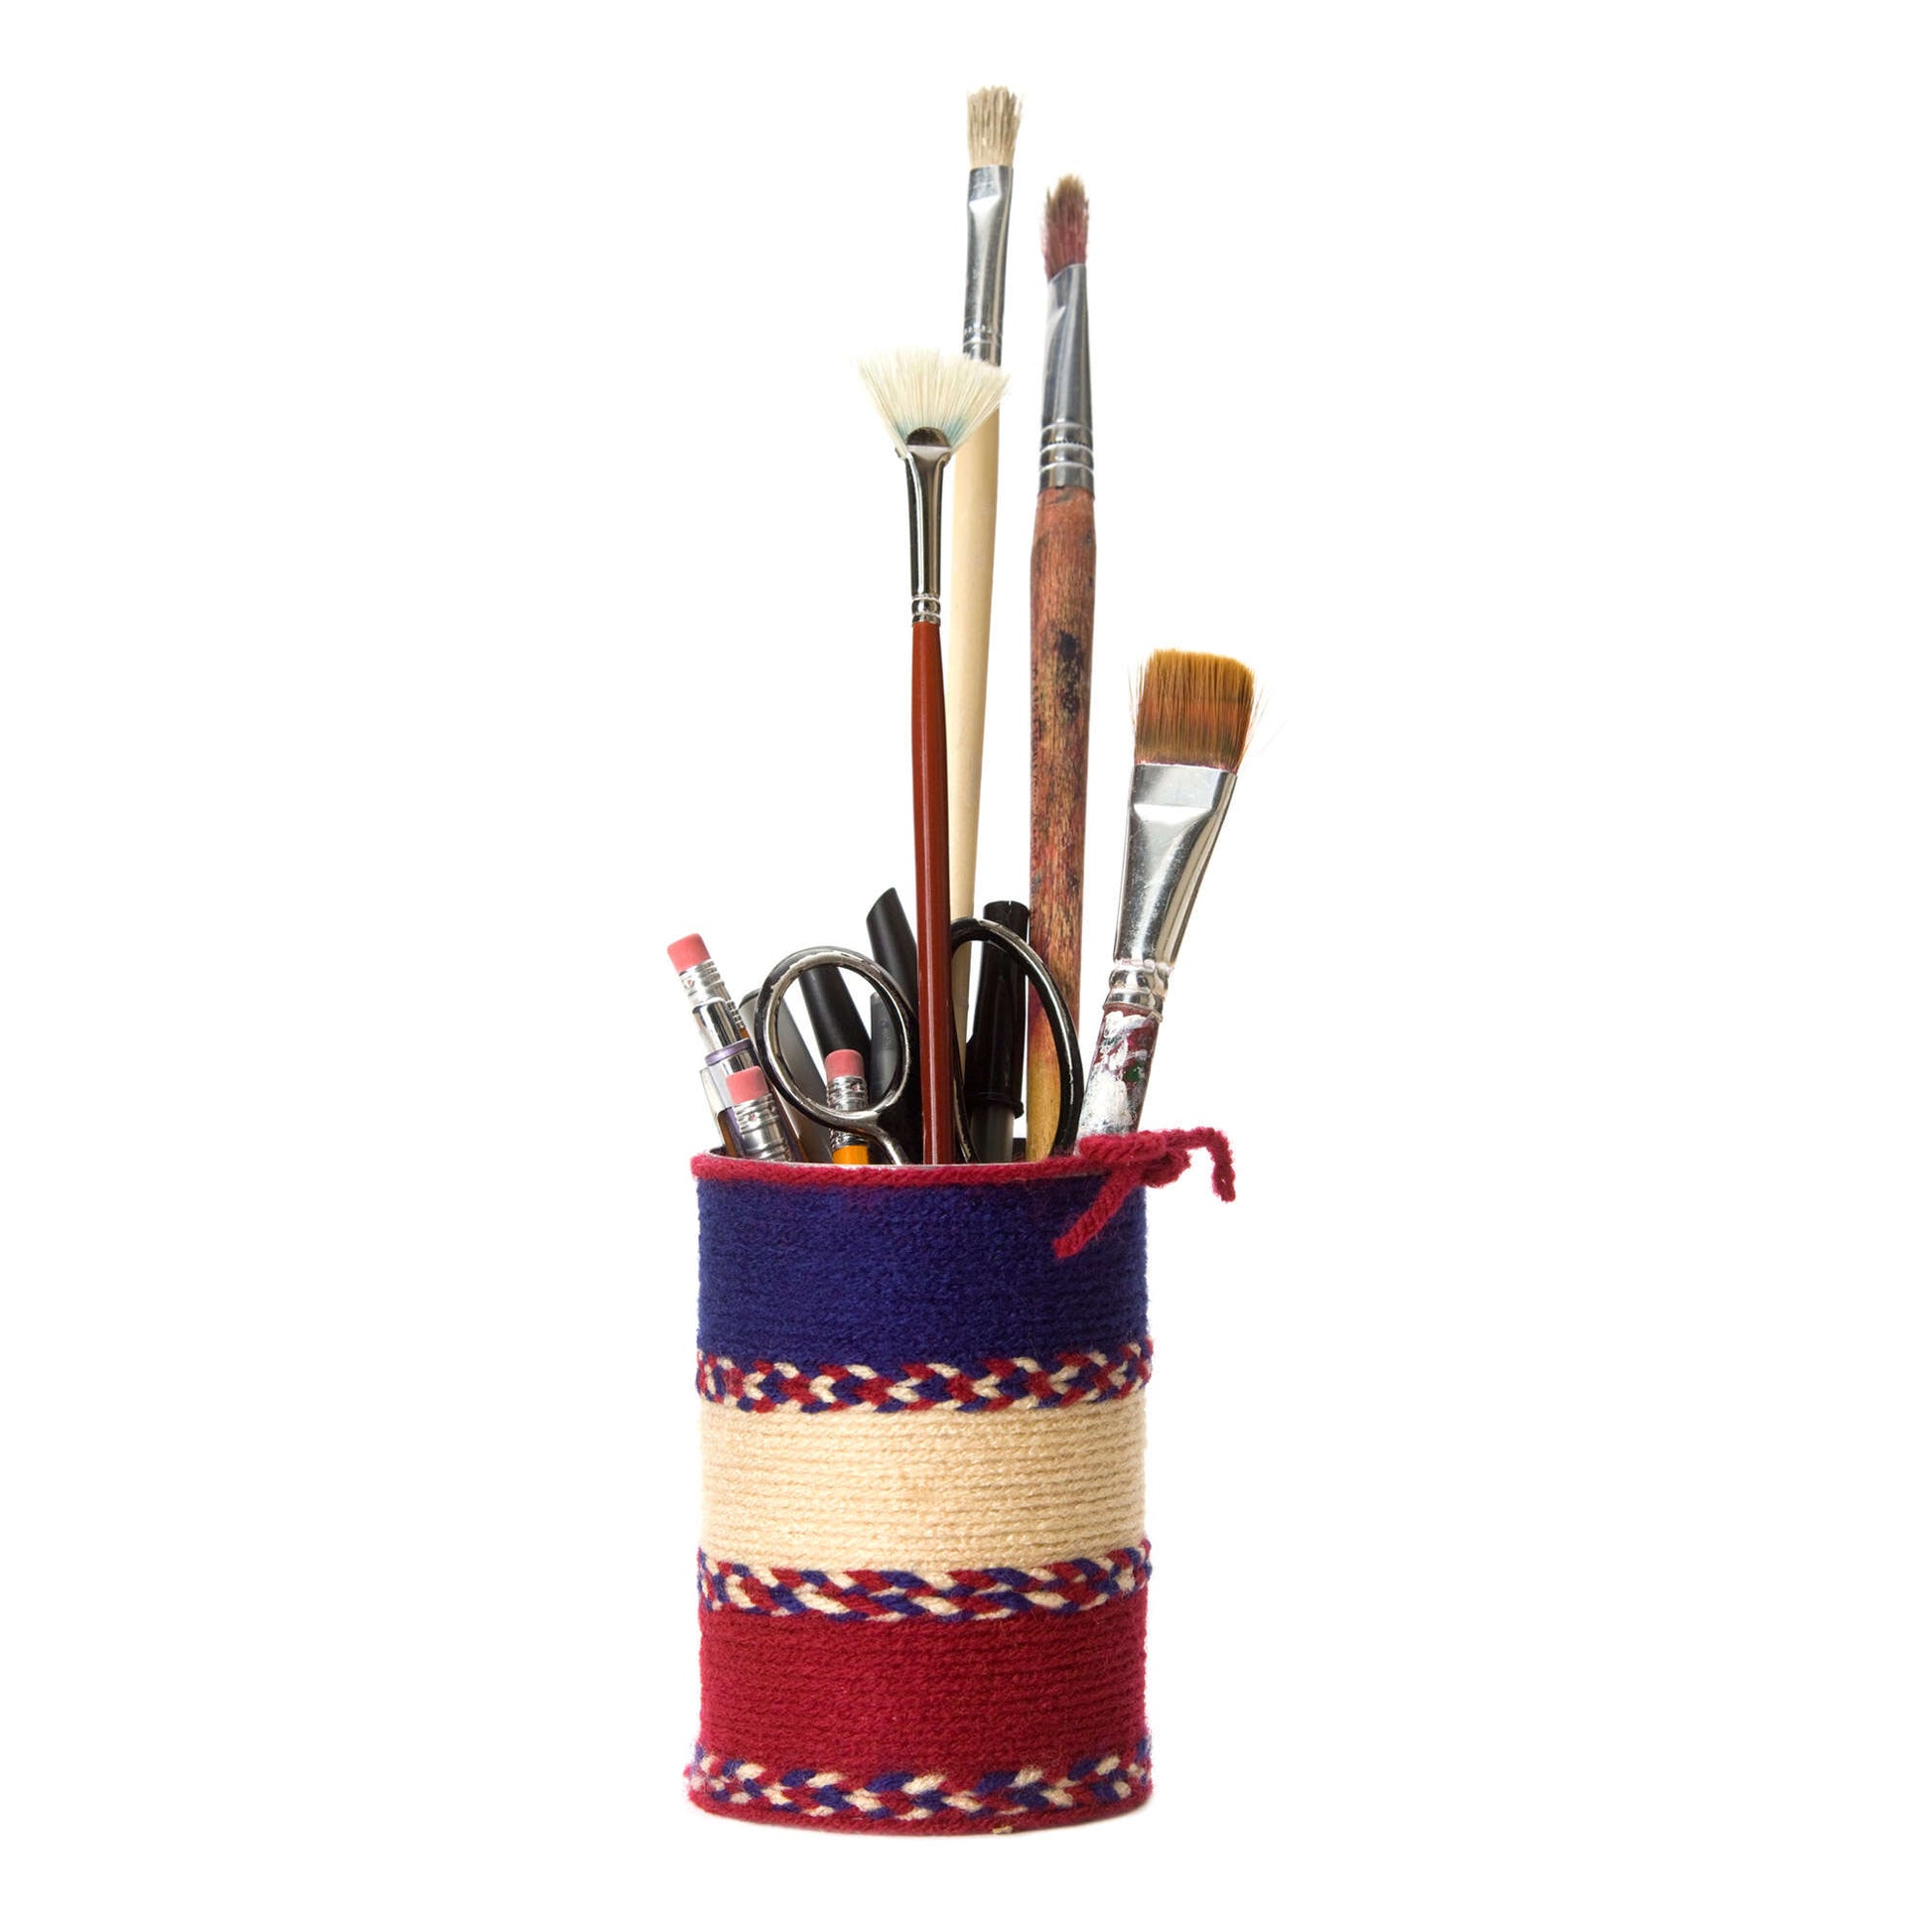 Free Red Heart Craft Pencil Can Holder Pattern